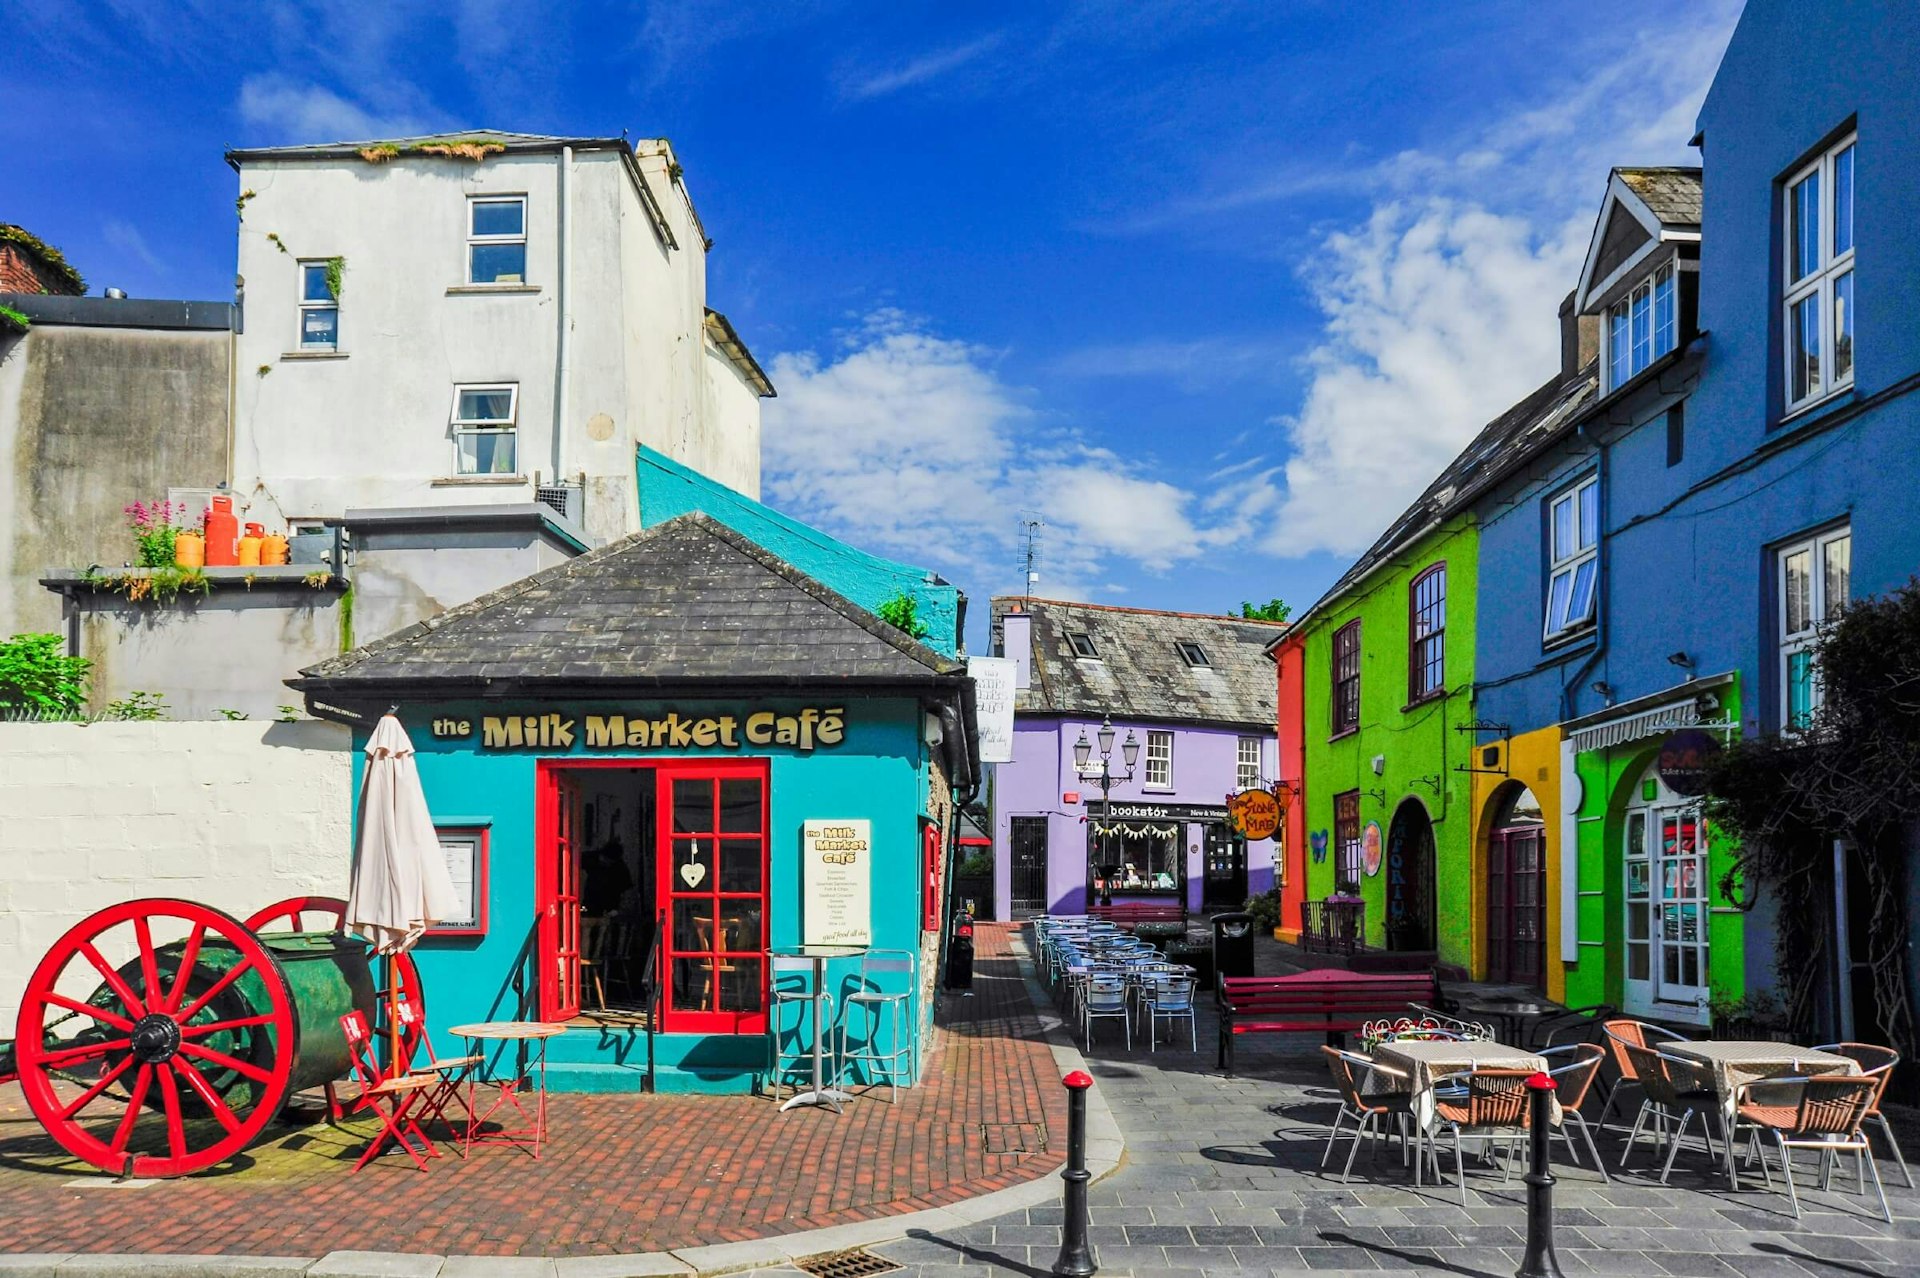 Buildings in Kinsale painted bright colours with table and chairs from a cafe in the foreground